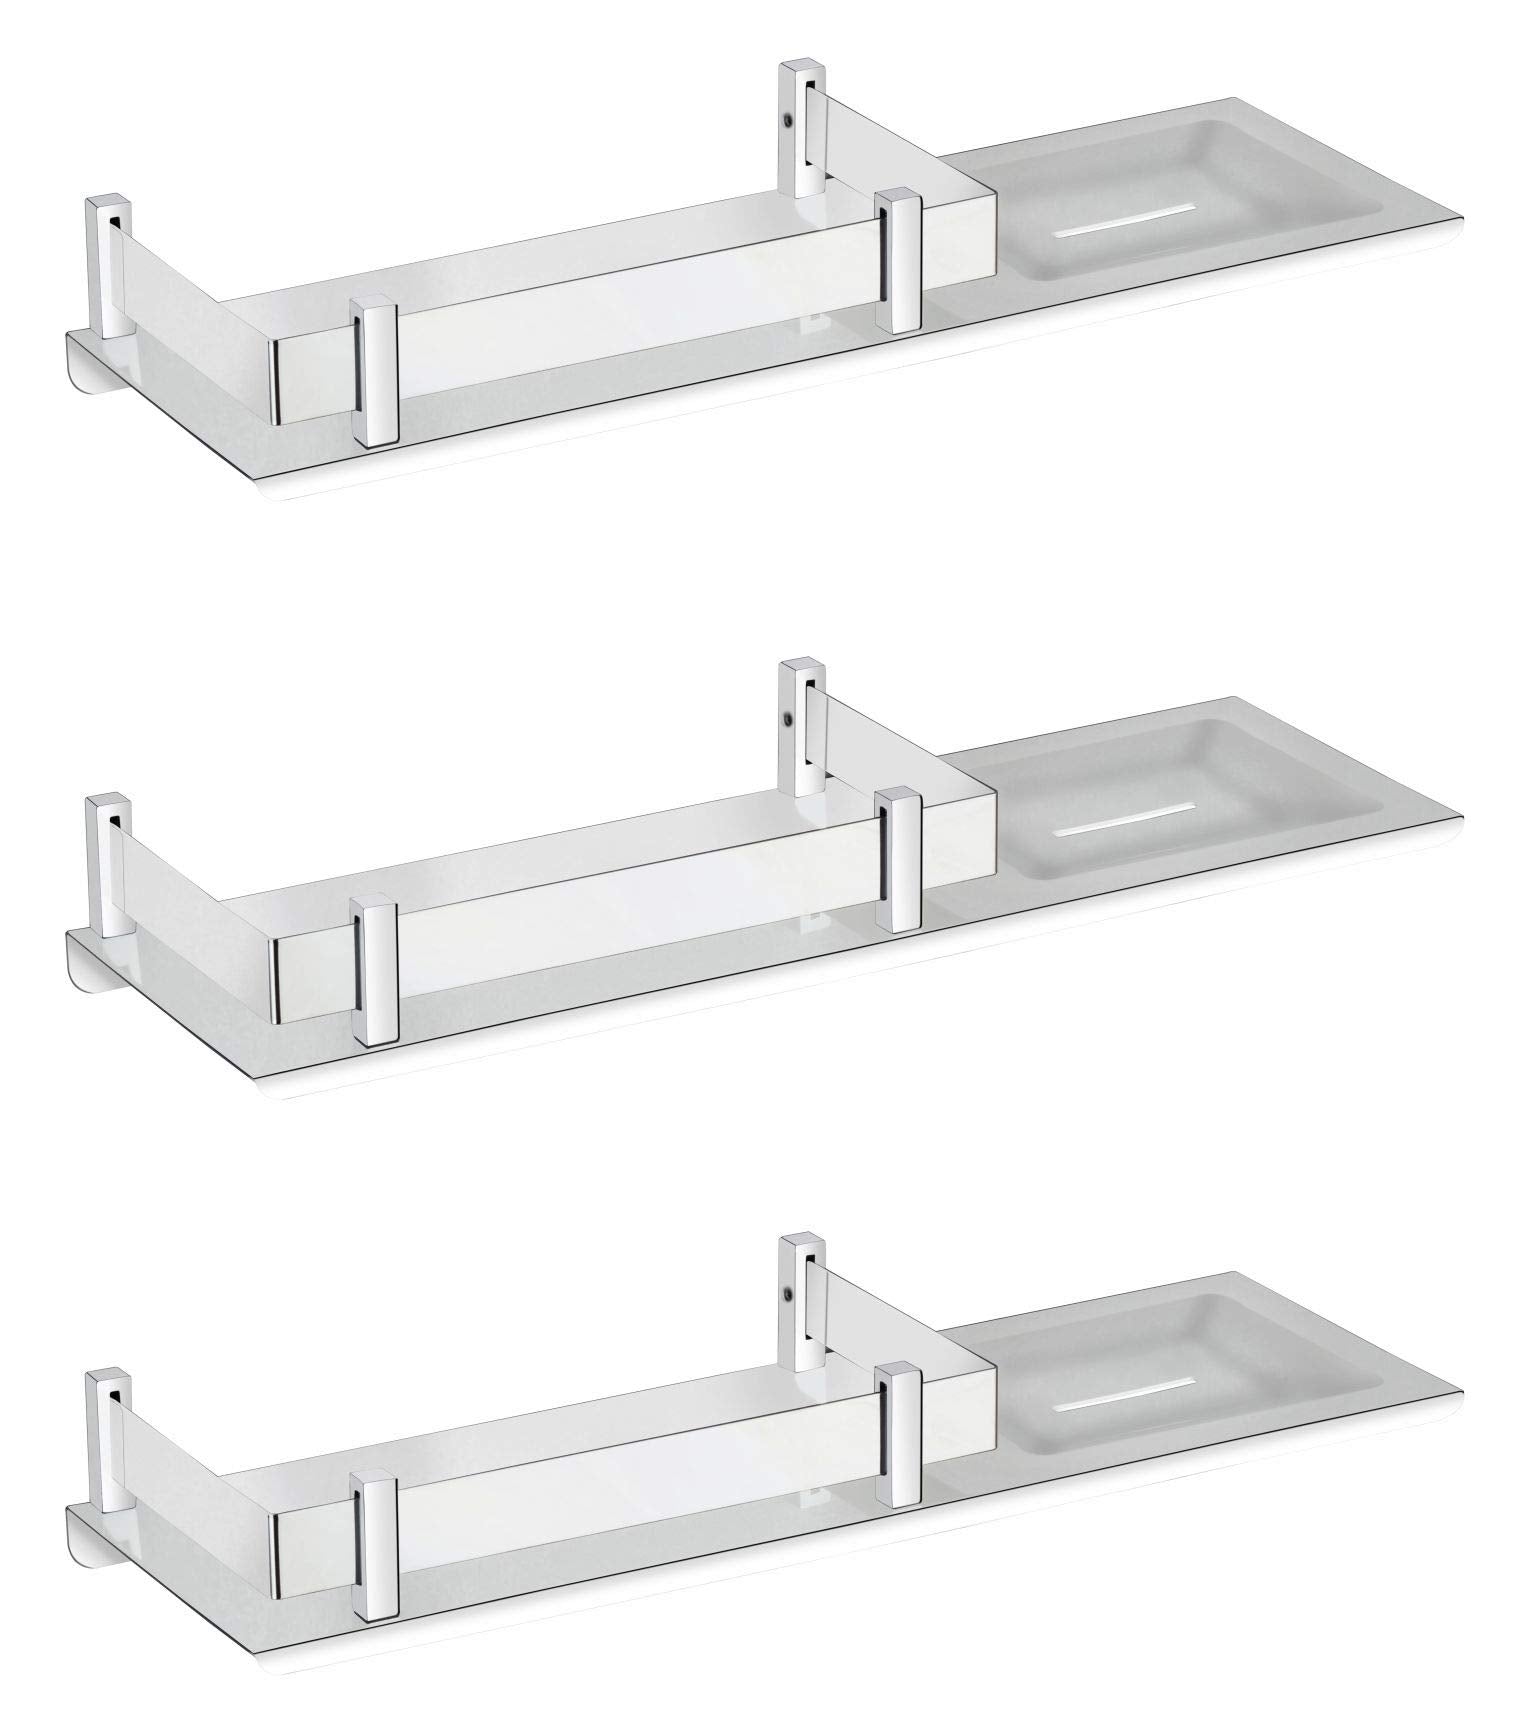 Plantex Stainless Steel 2in1 Multipurpose Bathroom Rack/Shelf with soap Dish/Holder - Multipurpose - Bathroom Accessories (15x5 Inches) – Pack of 3